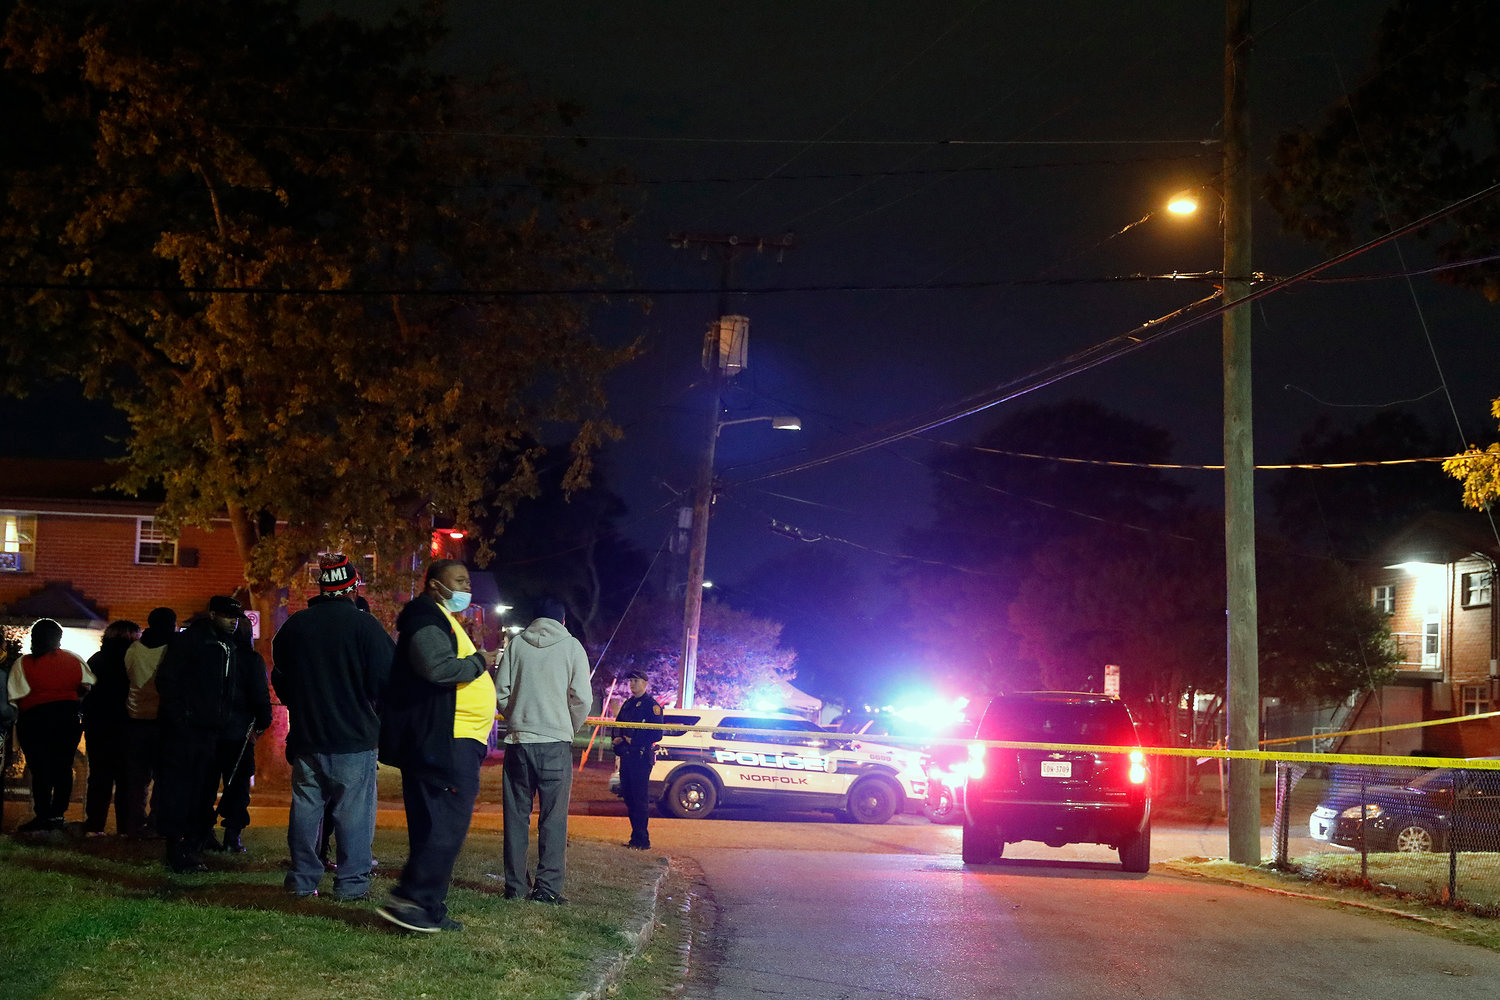 A crowd gathers as Norfolk police officers respond to the scene of a shooting in the Young Terrace neighborhood of Norfolk, Virginia on Wednesday, Nov. 3, 2021. (Jonathon Gruenke/The Virginian-Pilot/TNS)